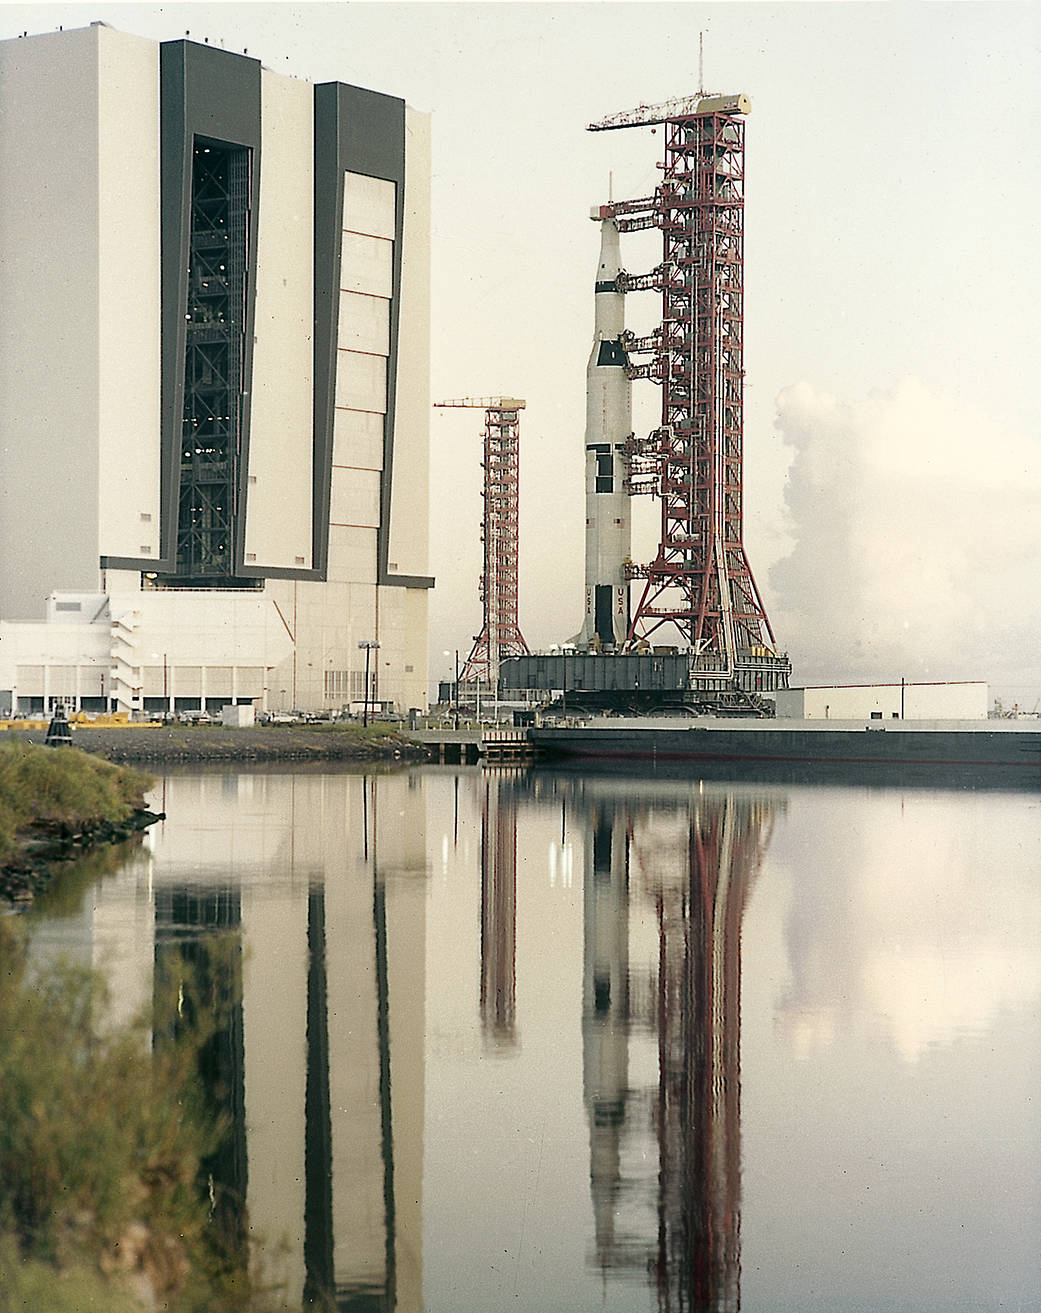 In August 1967, the Saturn V vehicle (AS-501), rolled out to the launch pad in preparation for its first launch. 